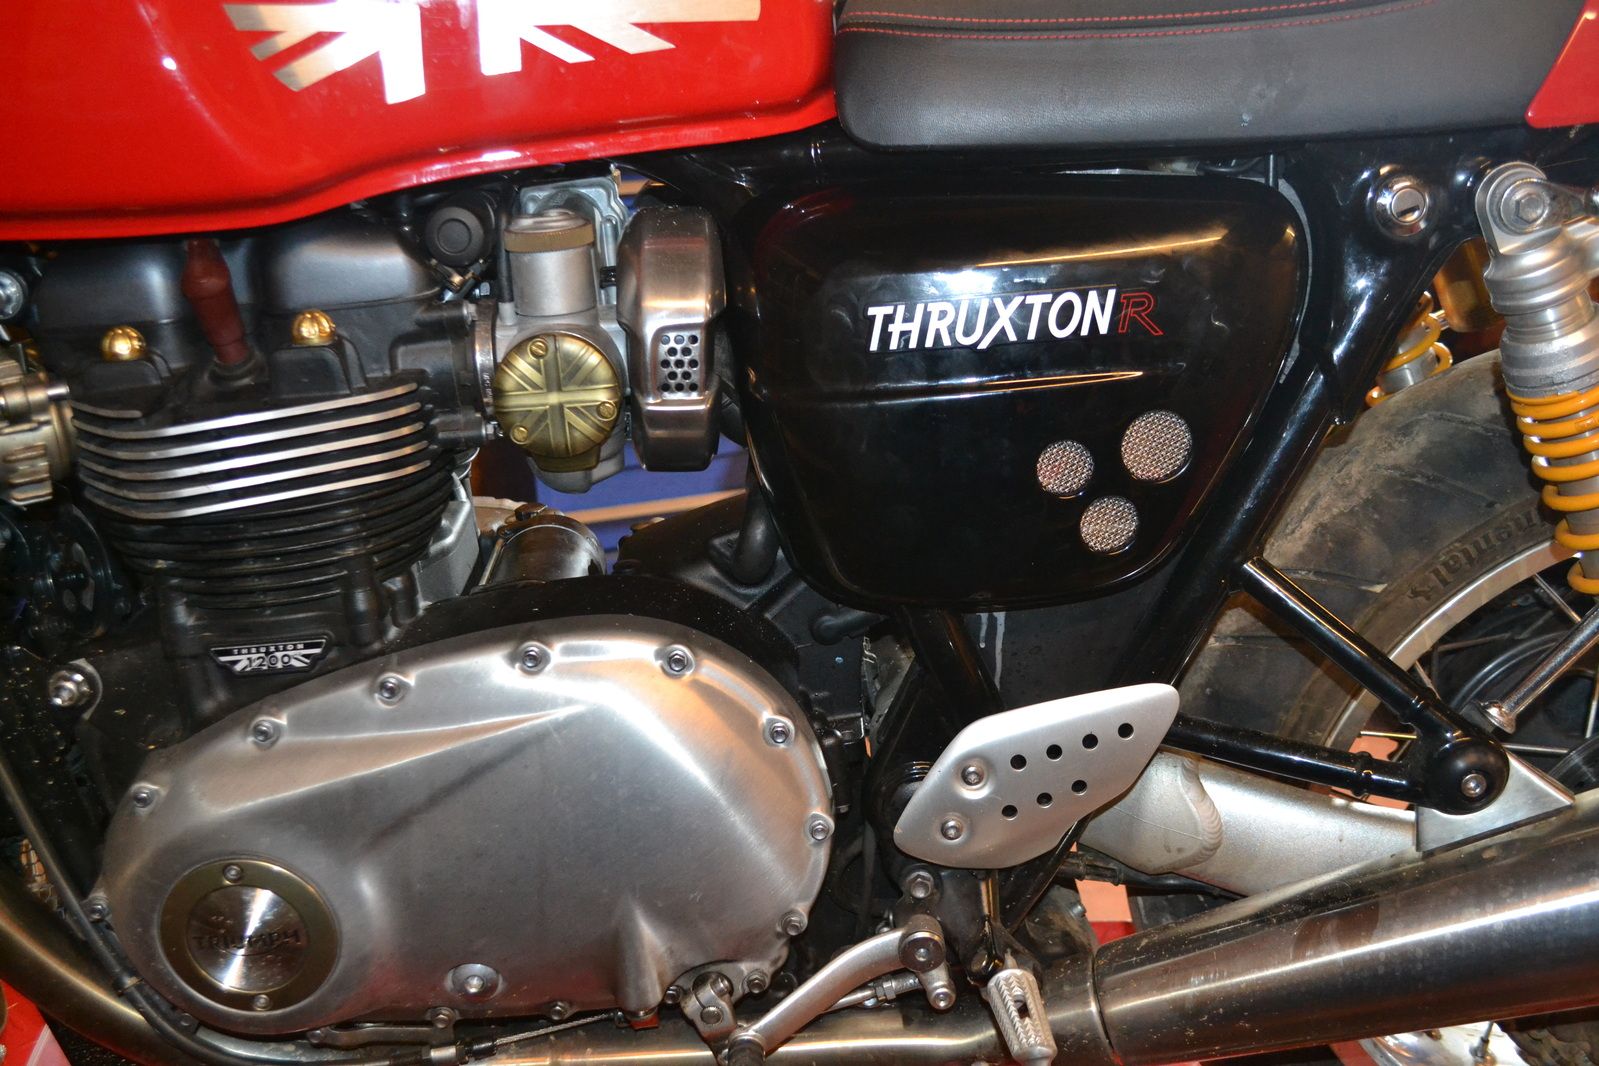 Air Box Removal Kit for Triumph Triumph Motorcycles